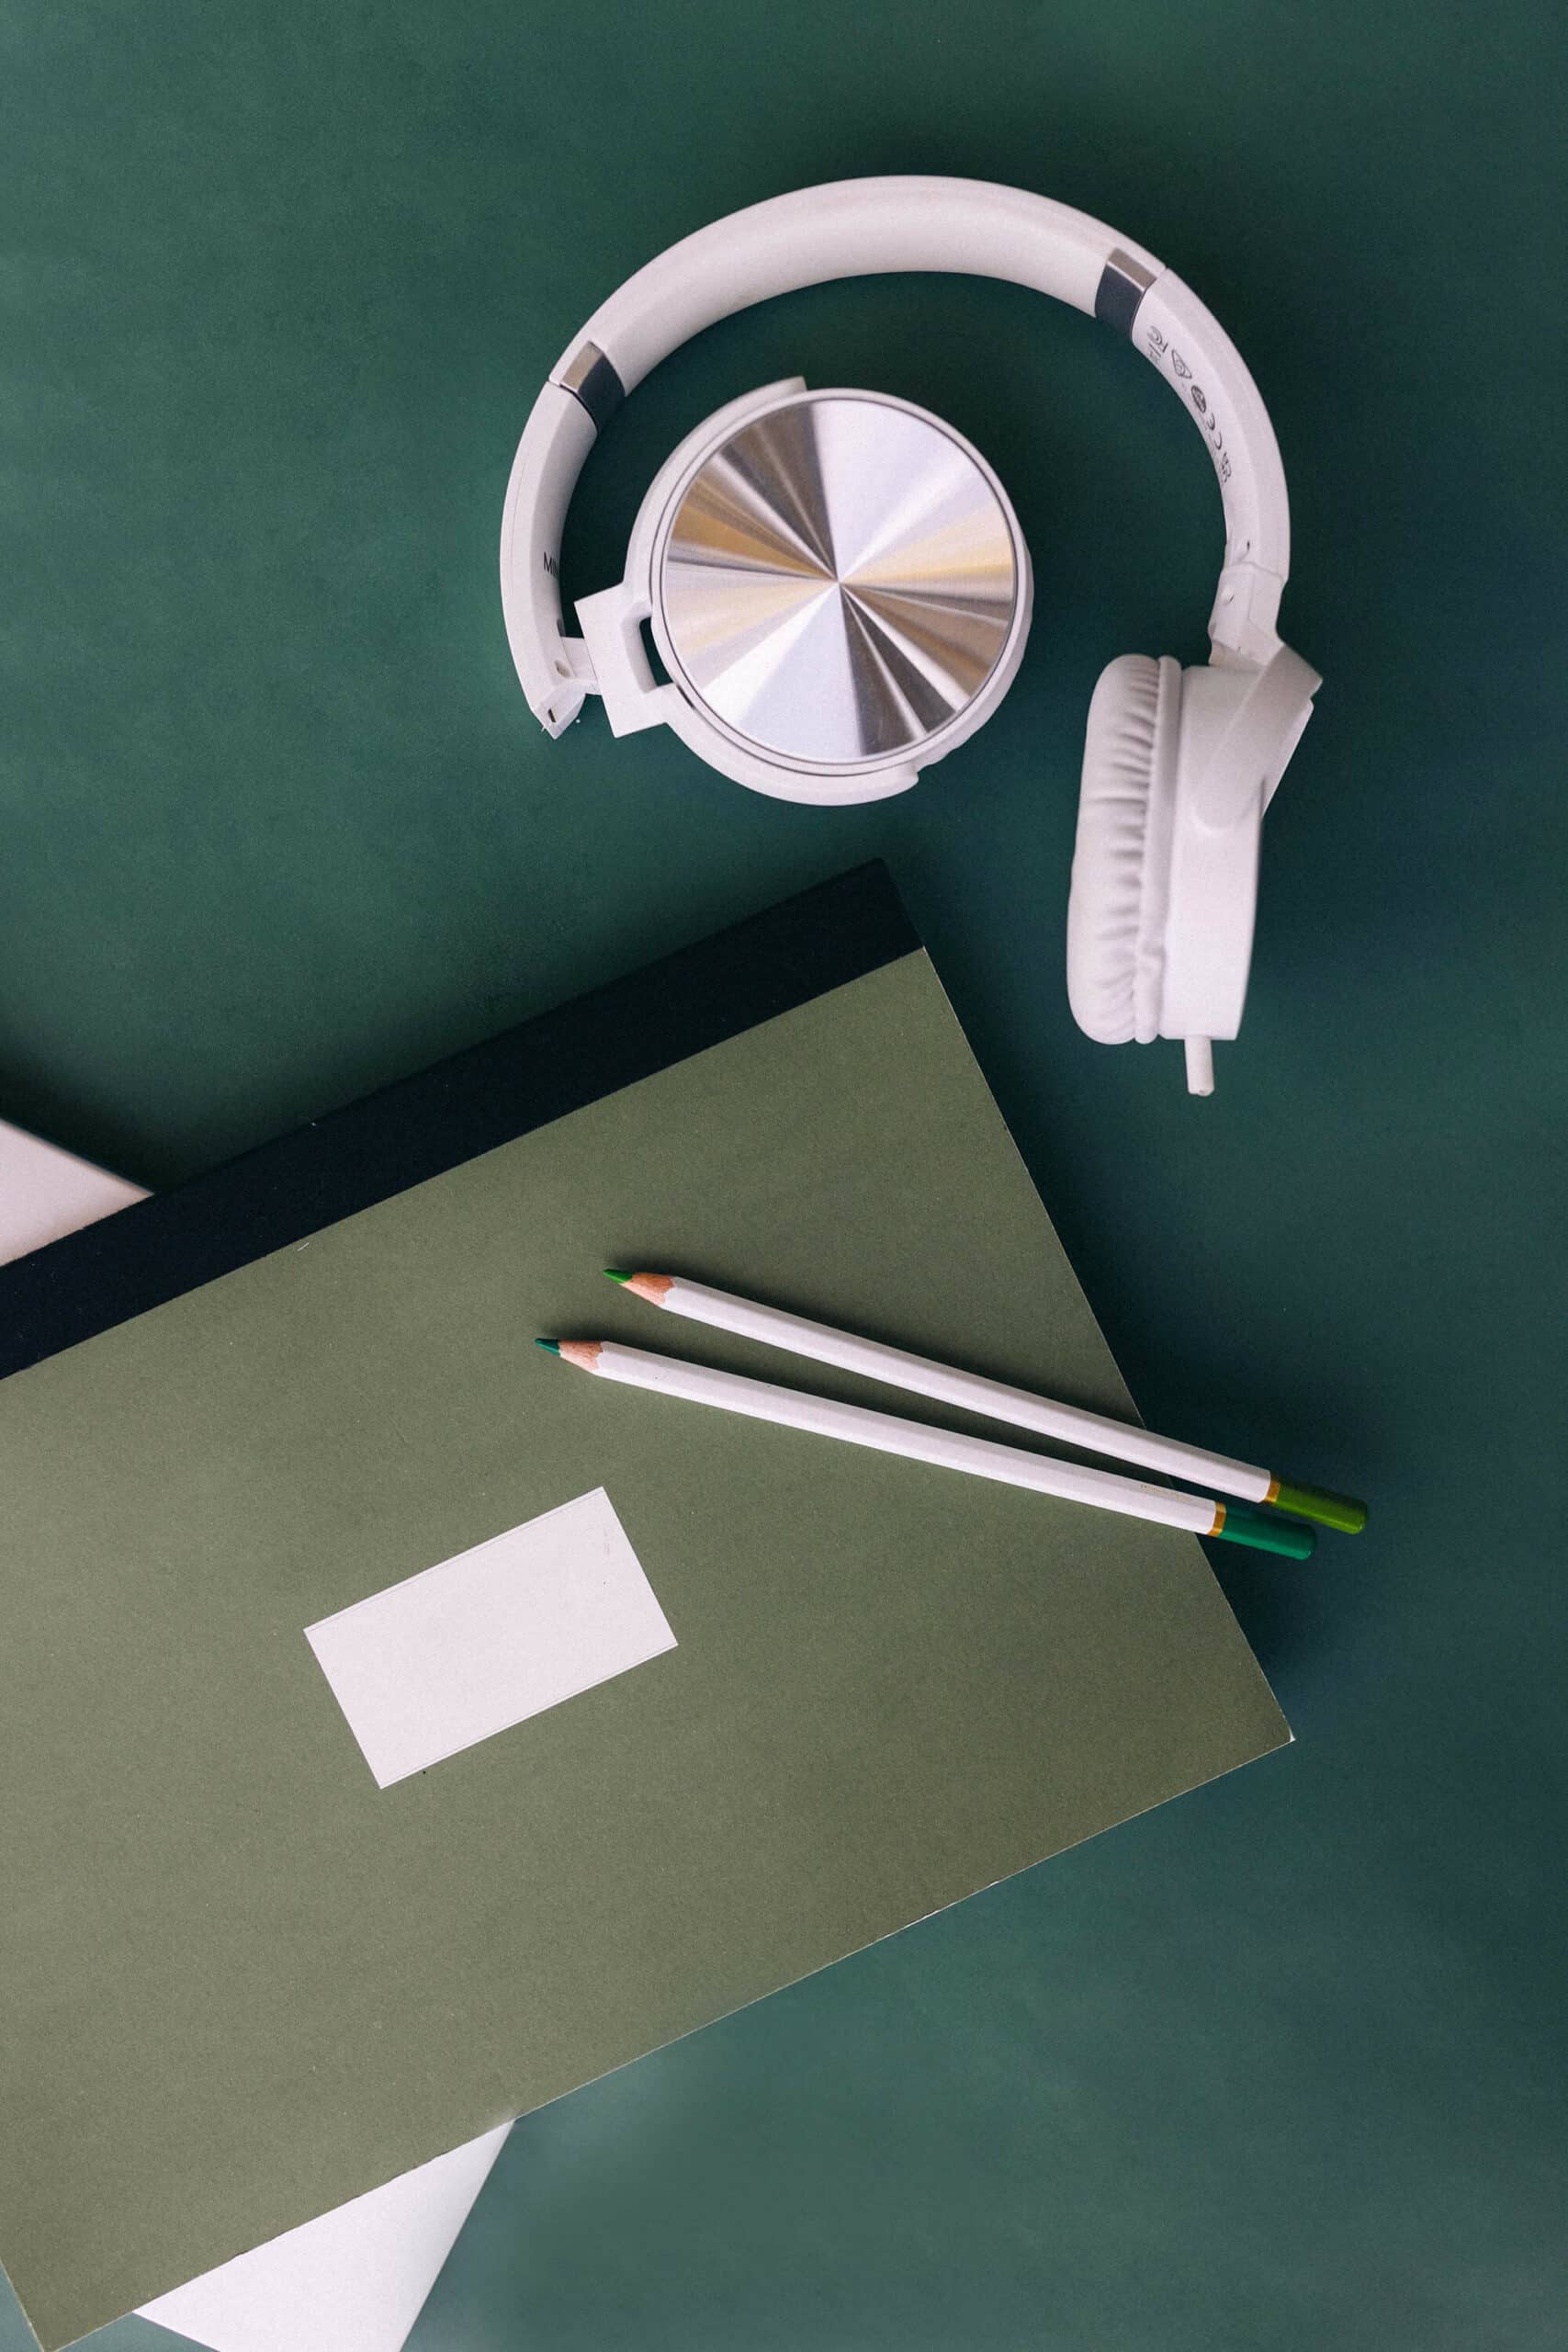 A pair of white over-ear headphones laid on a green surface next to a dark green notebook with a blank white rectangular label attached to it and two pencils on top.